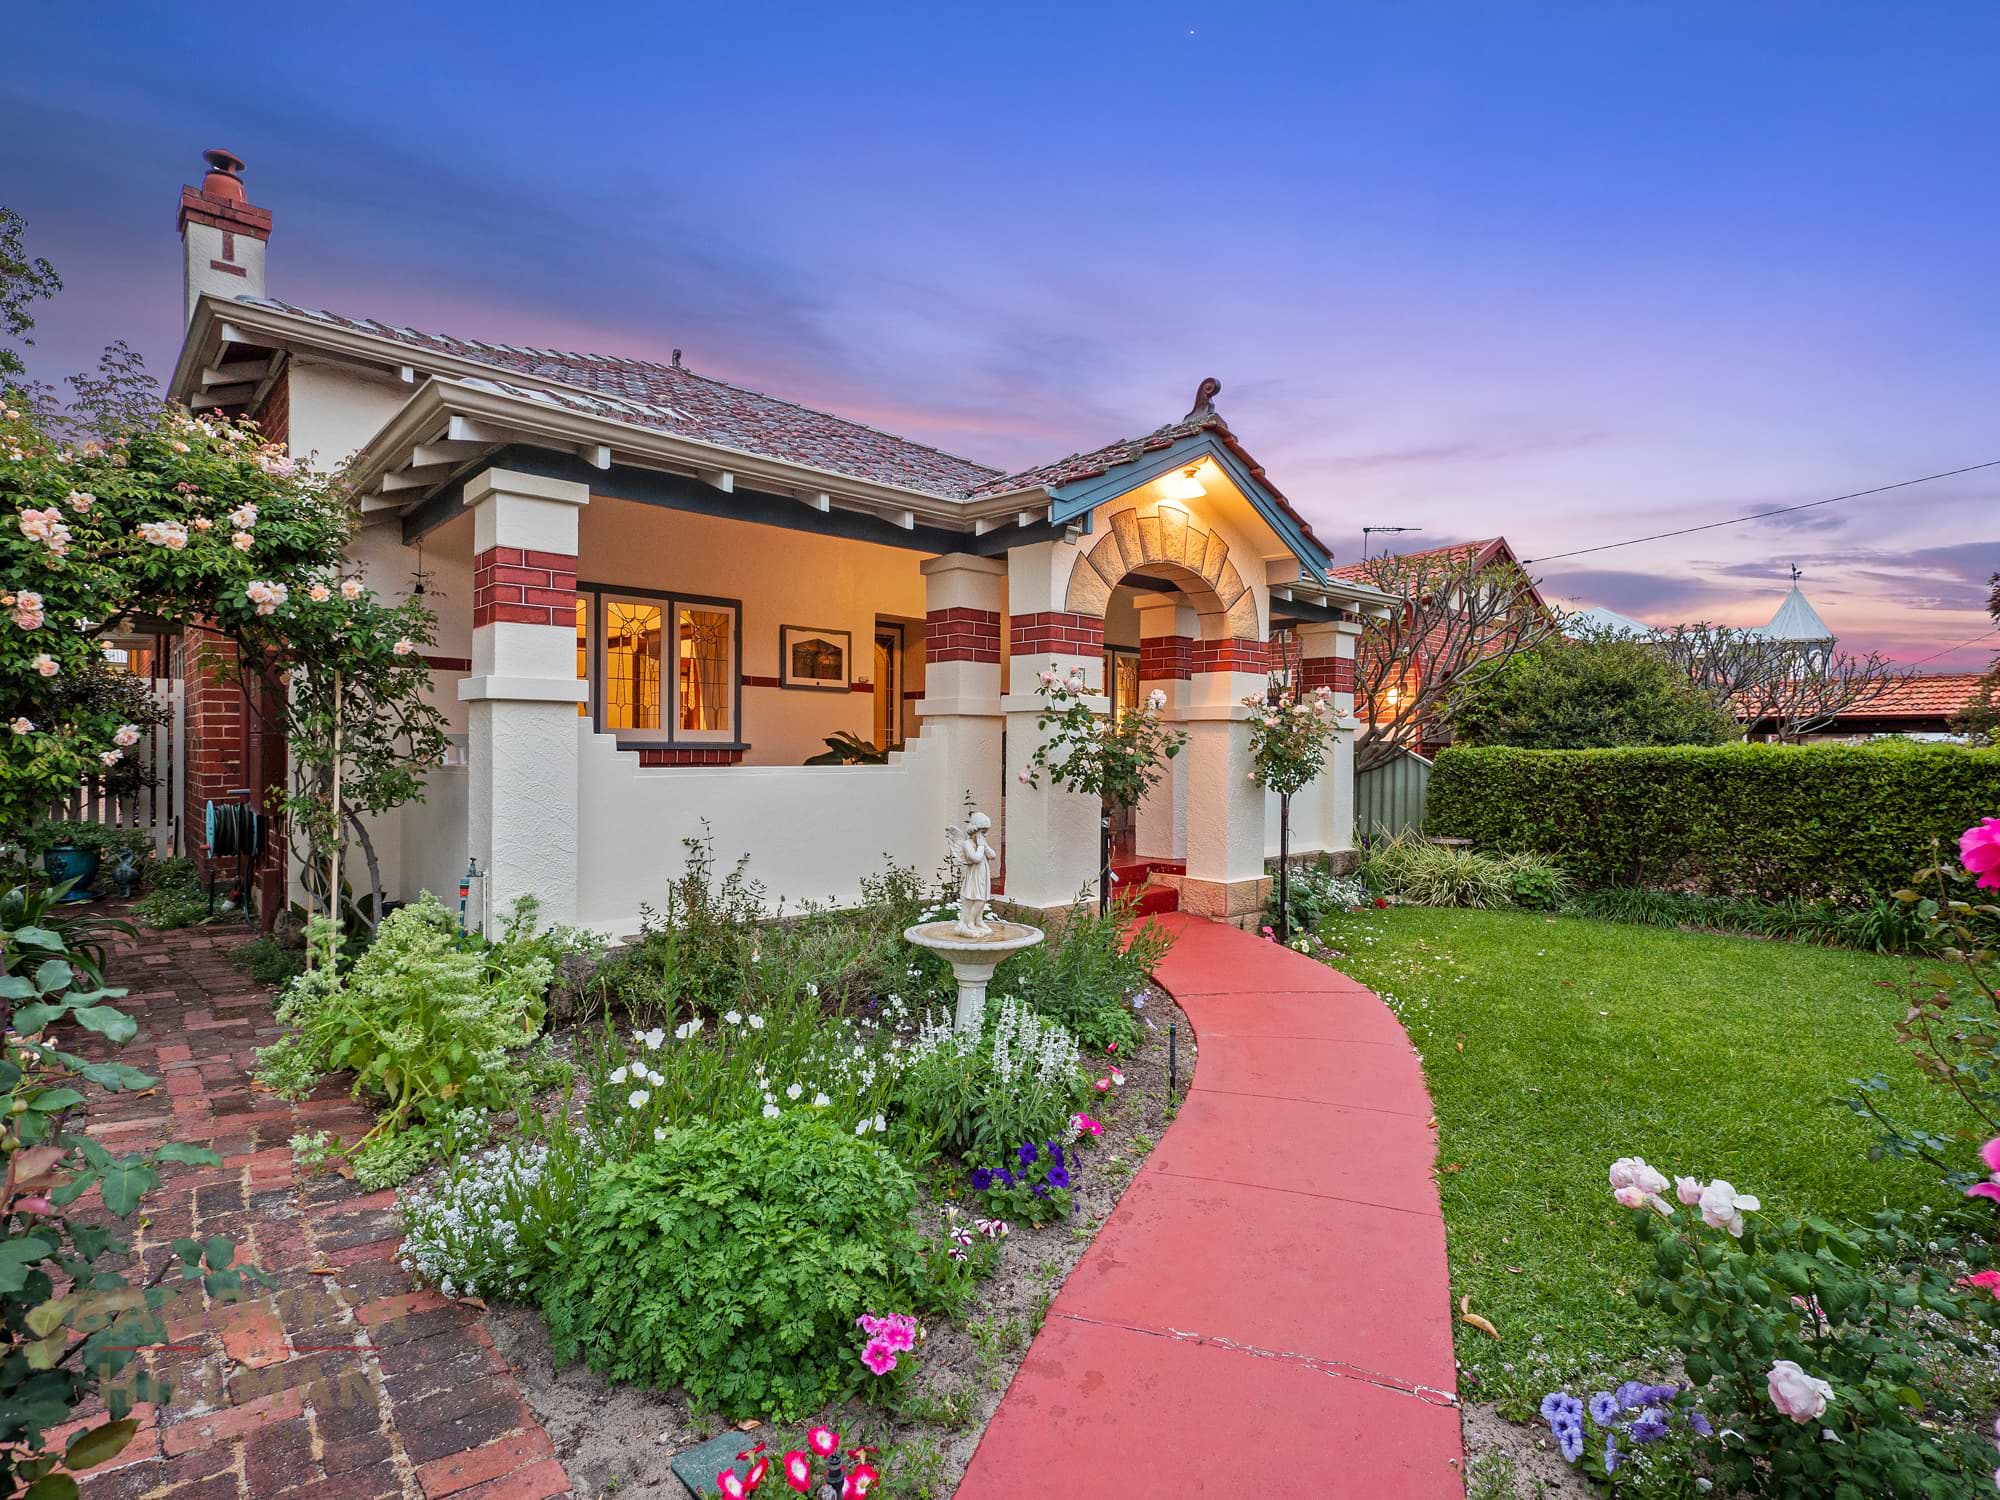 Front of Kensington, Perth property with brick road leading in.